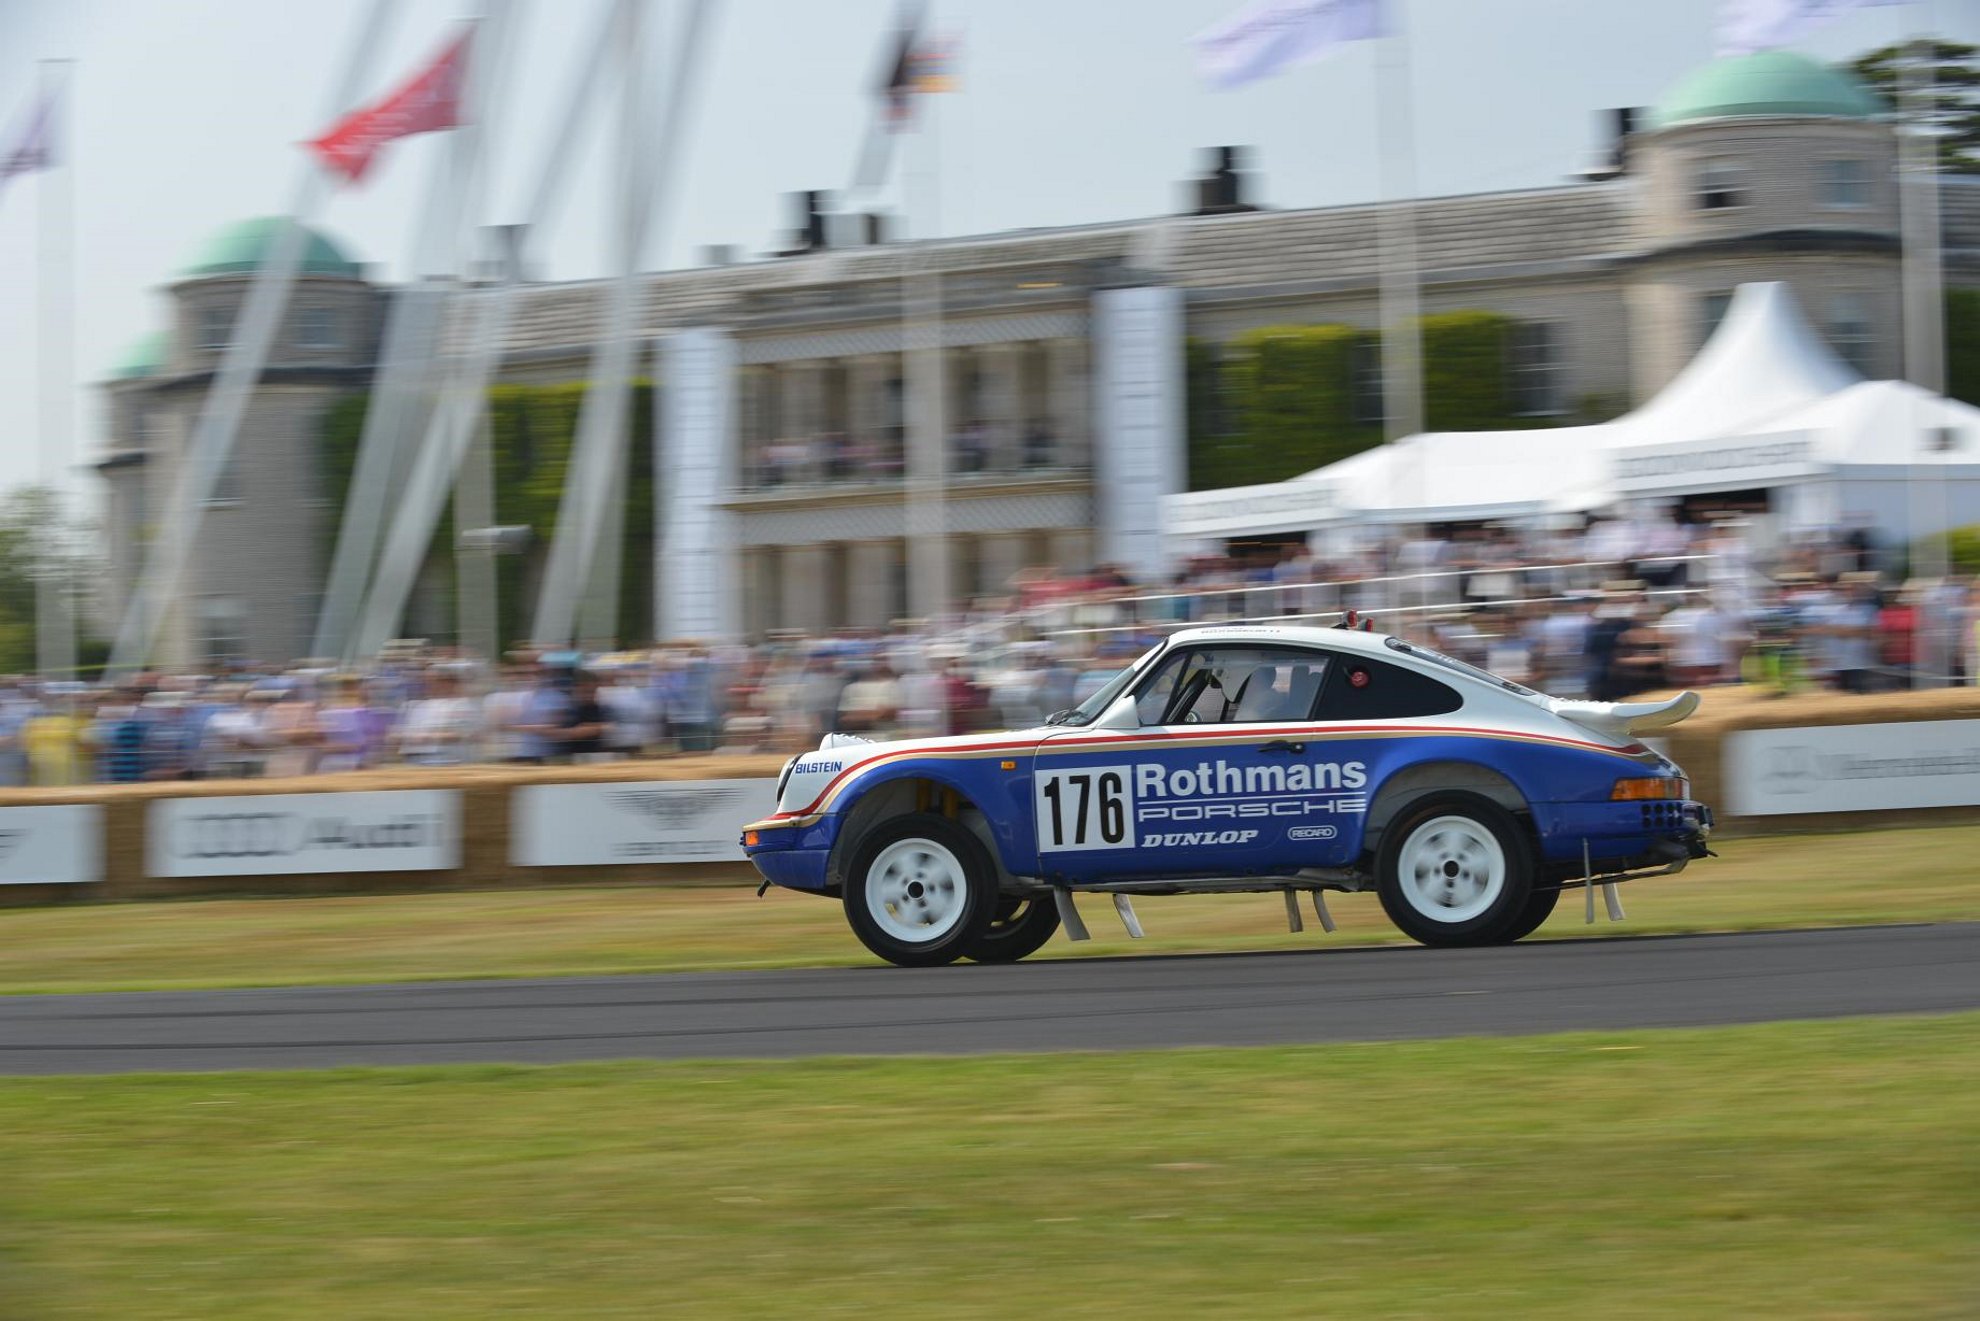 Images of Porsche at the Goodwood Festival of Speed